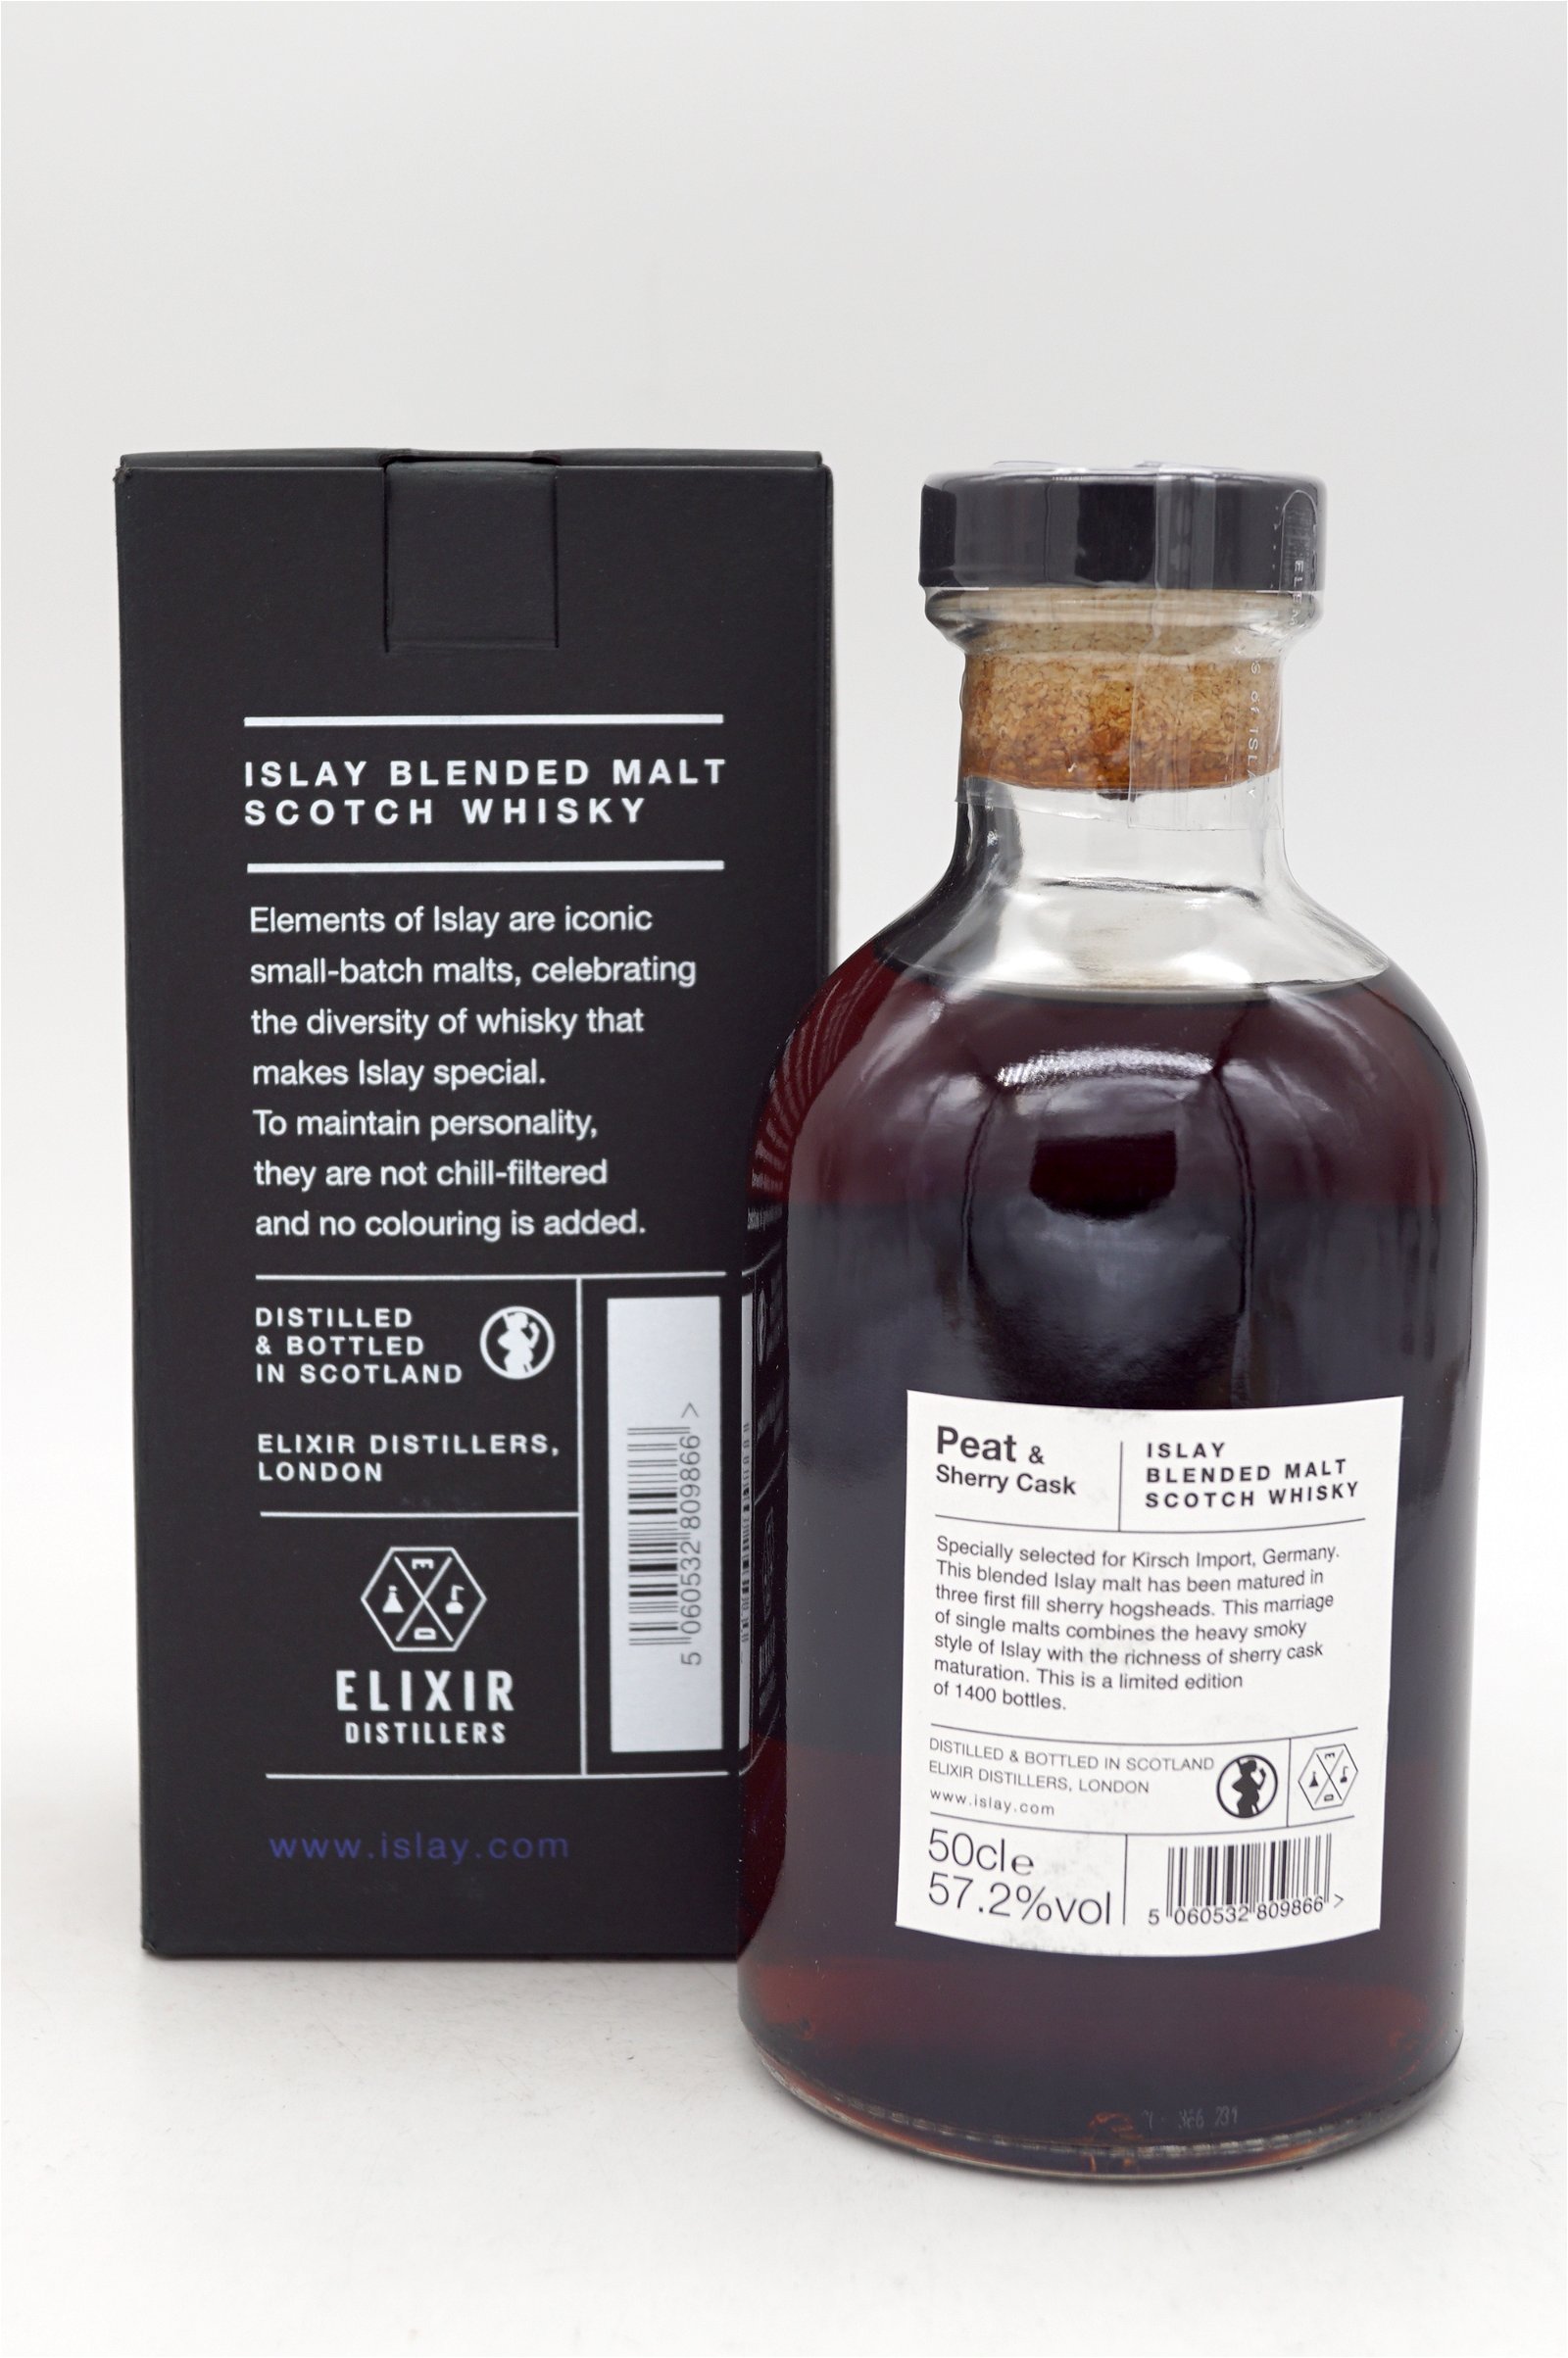 Peat & Sherry 2nd Edition Islay Blended Malt Scotch Whisky